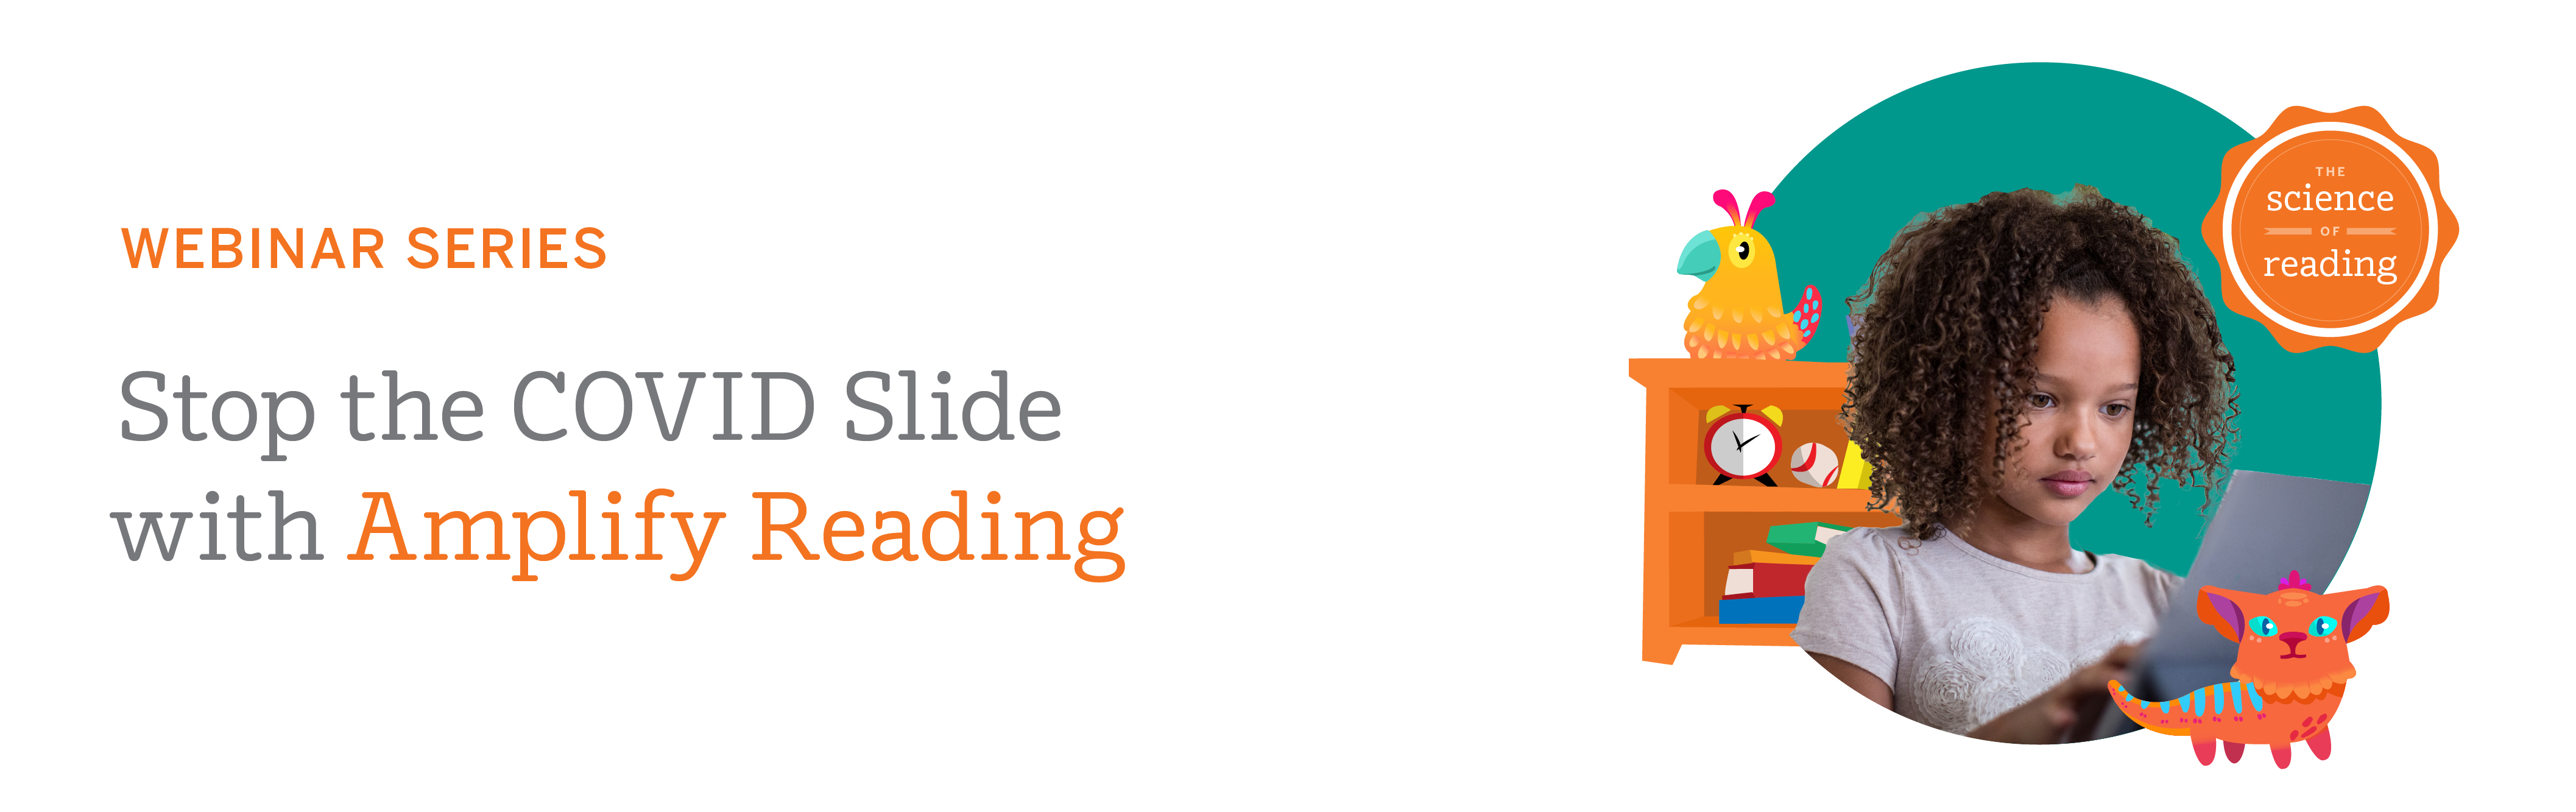 Webinar series: Stop the COVID slide with Amplify Reading